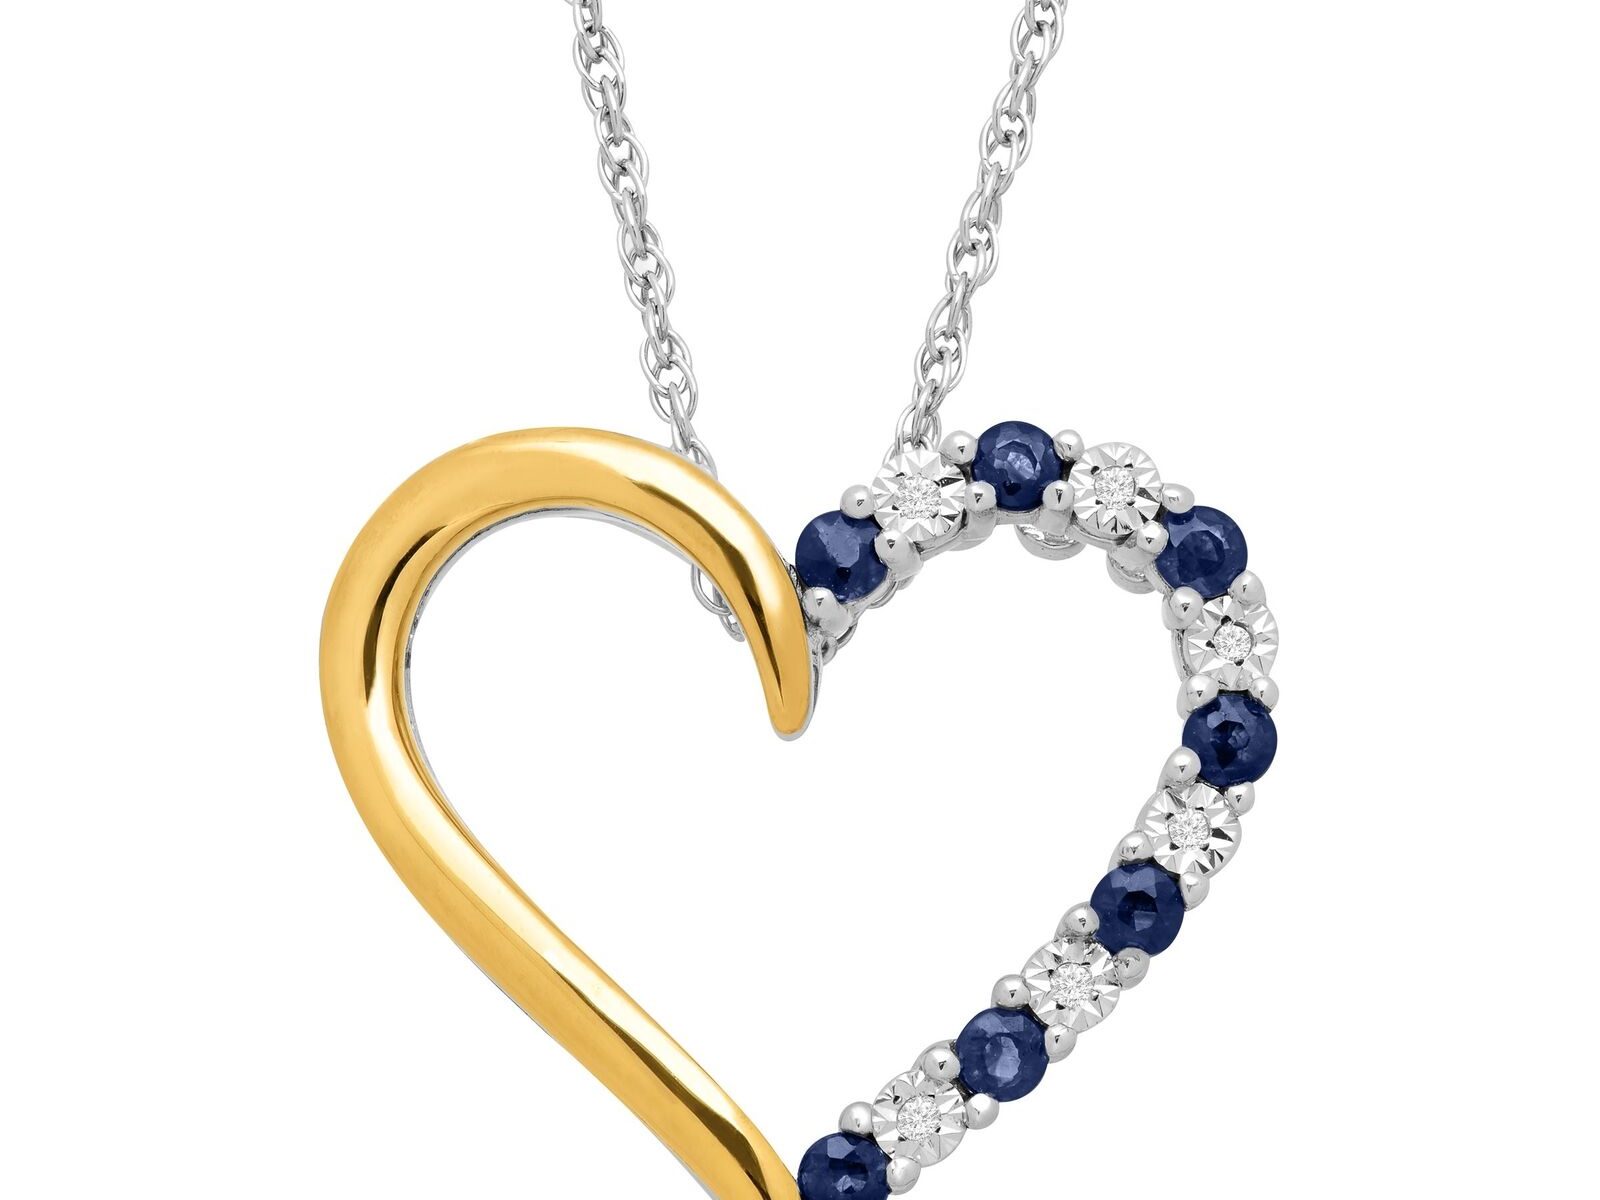 Natural Sapphire Open Heart Pendant with Diamonds in Sterling Silver & 14K Gold